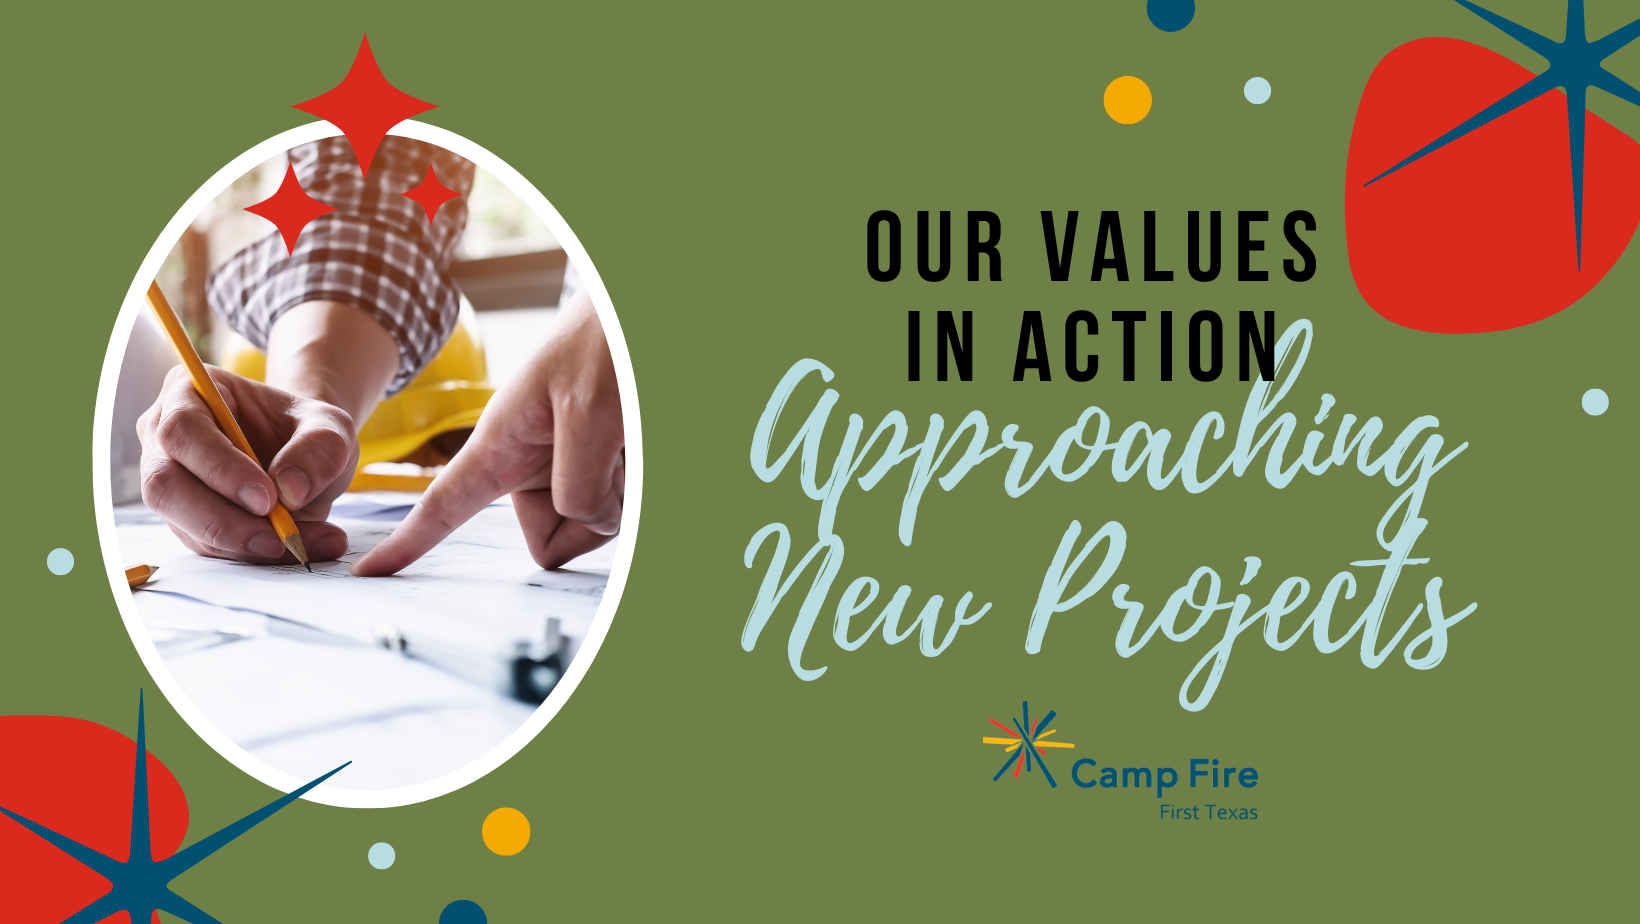 Our Values In Action – Approaching New Projects, a Camp Fire First Texas blog by Corey Fitzgerald